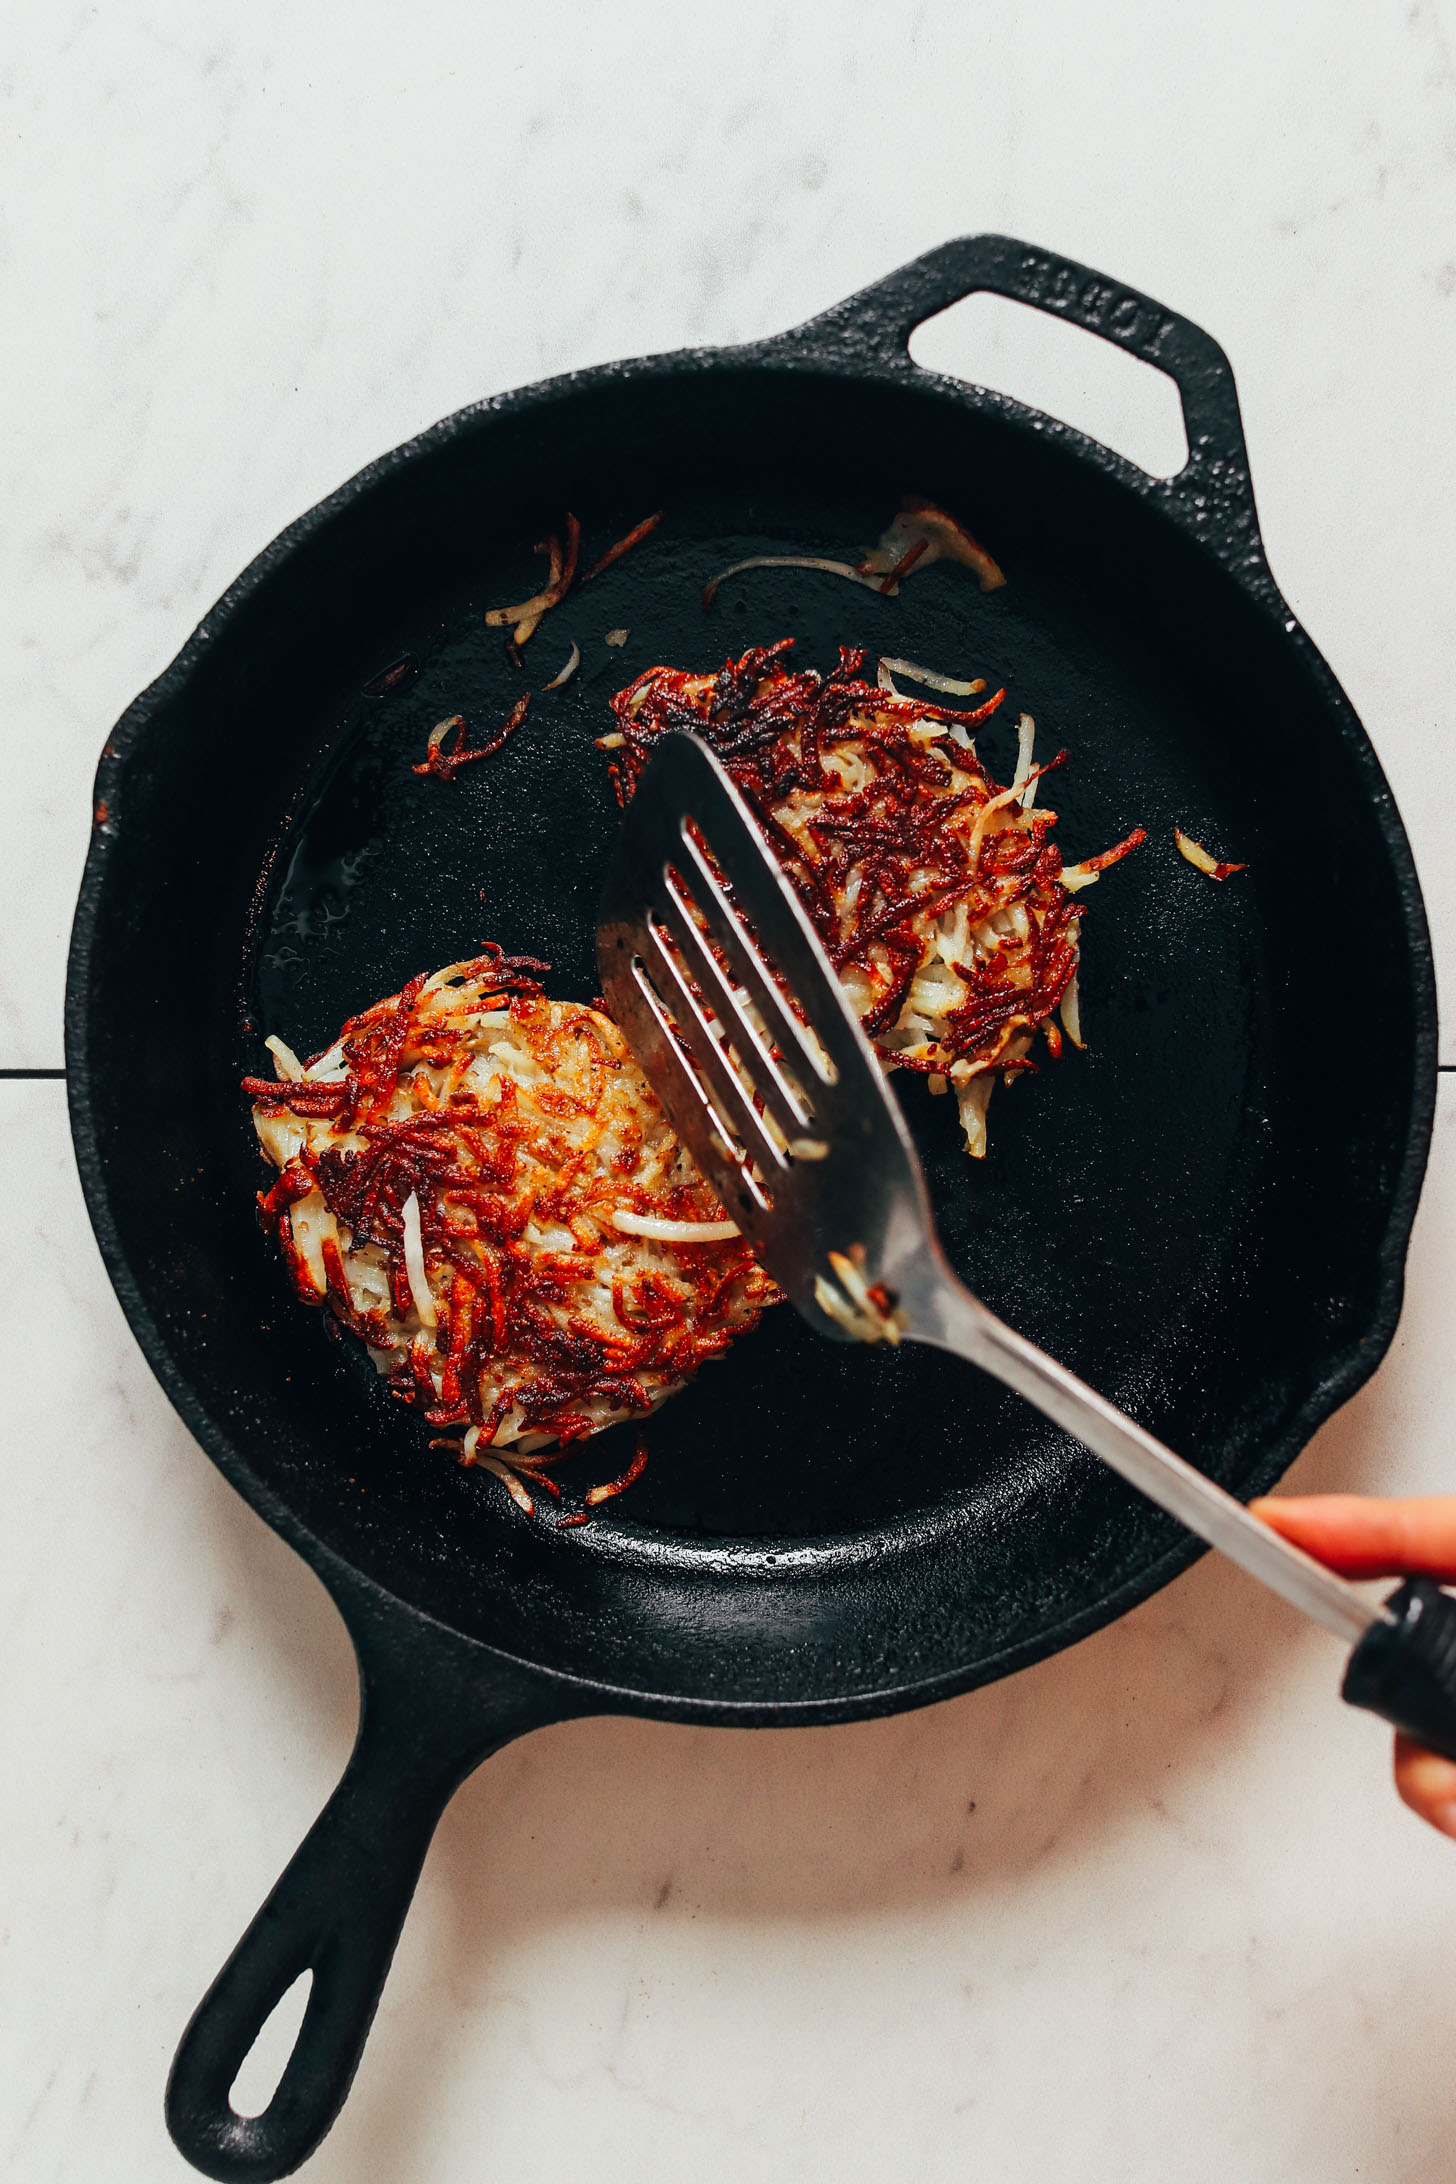 Crispy hash brown patties in a cast iron skillet